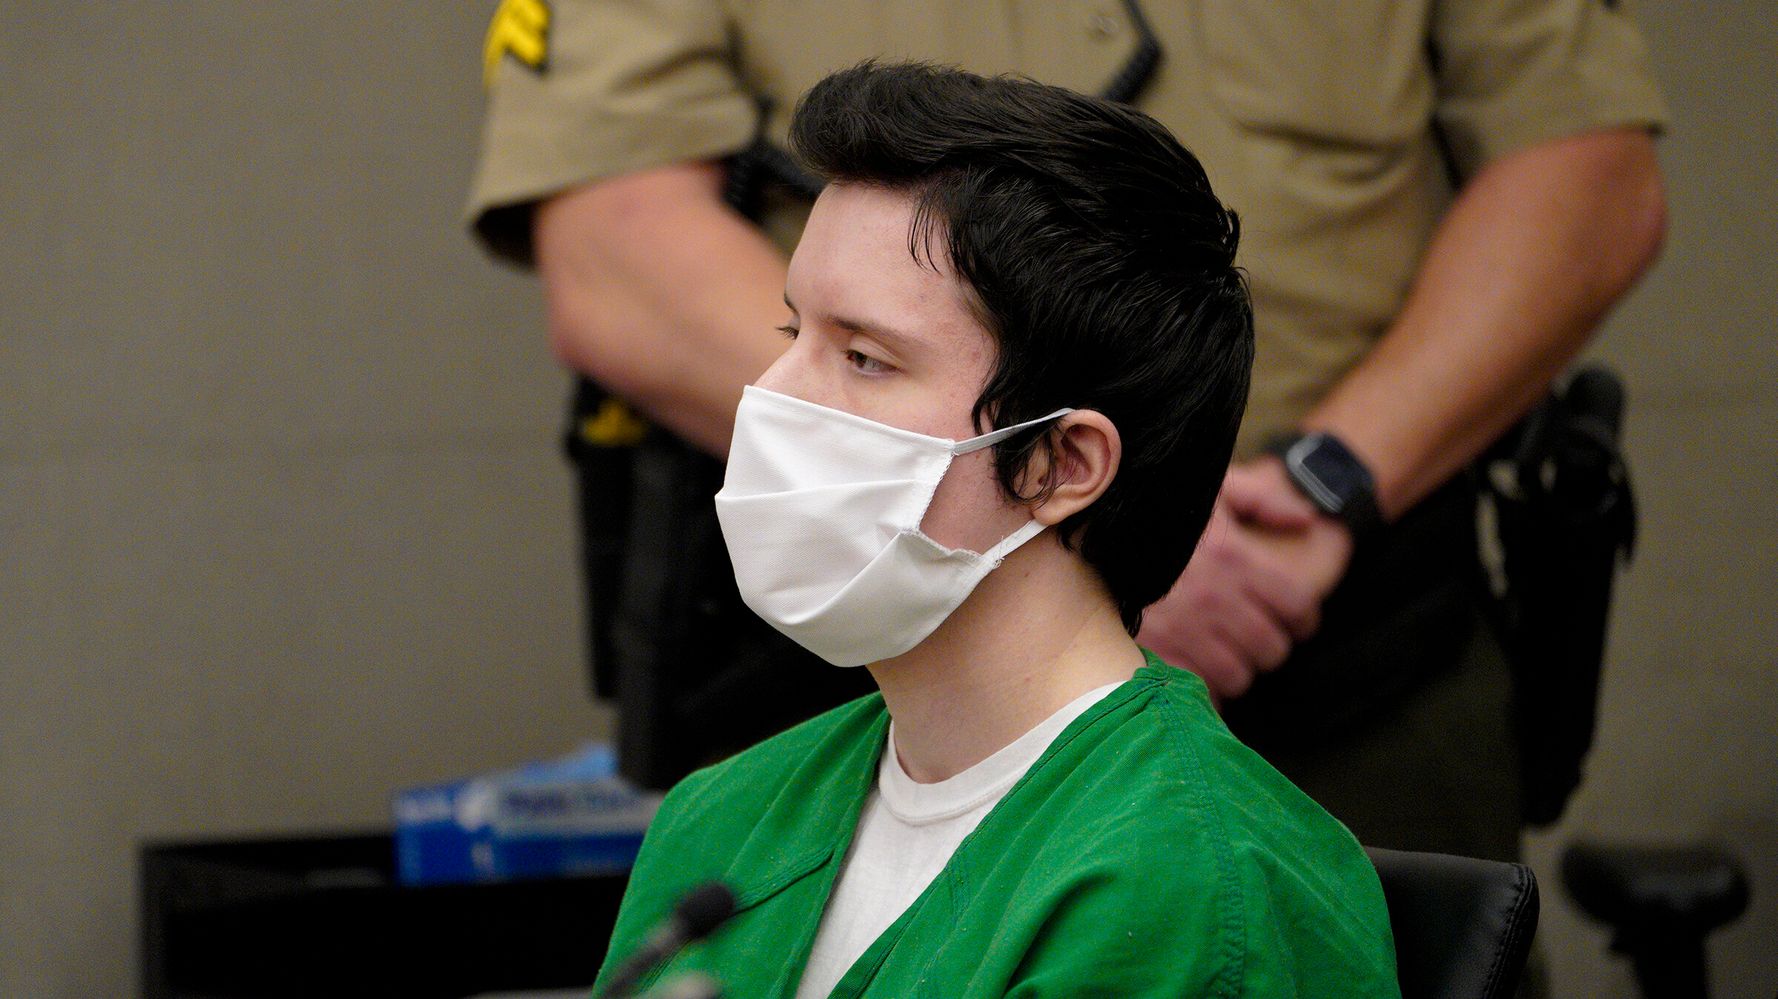 White Supremacist Gets Life Sentence For California Synagogue Shooting